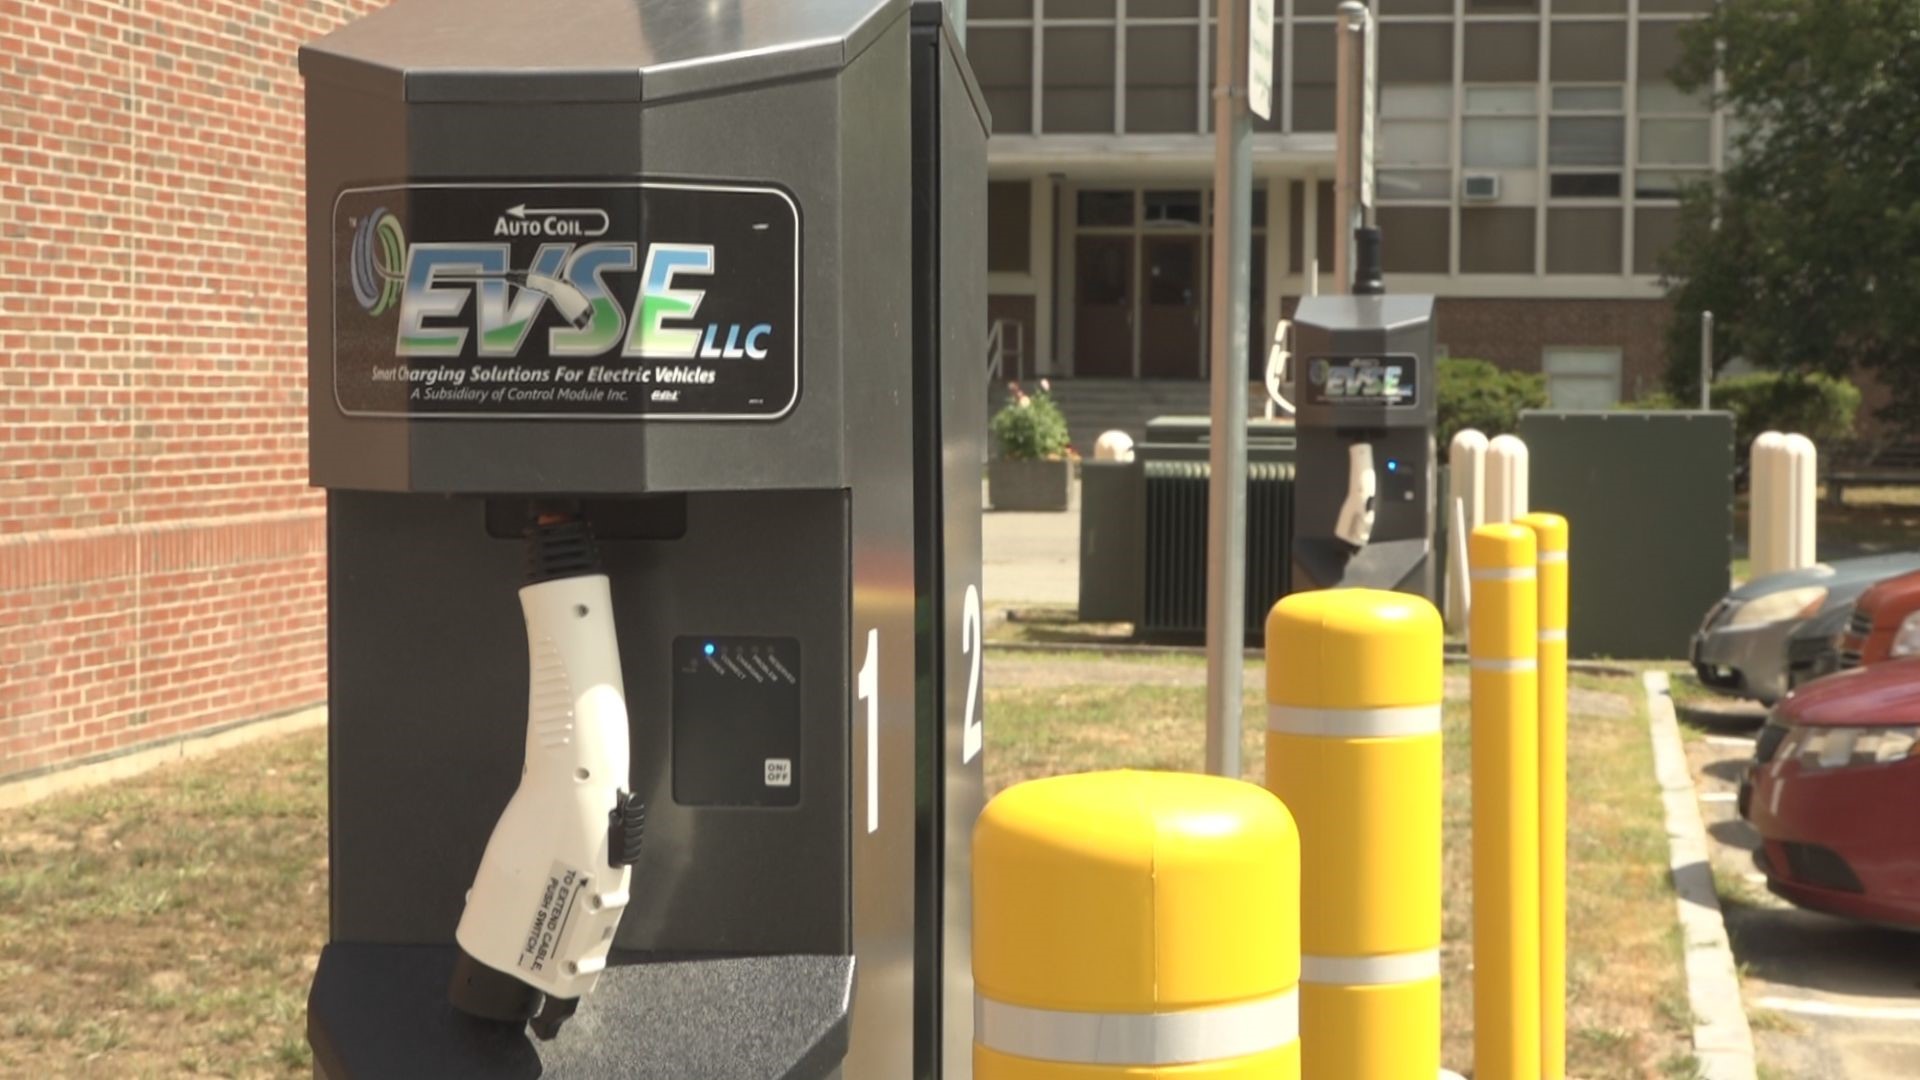 University of Maine adds more electric vehicle charging stations